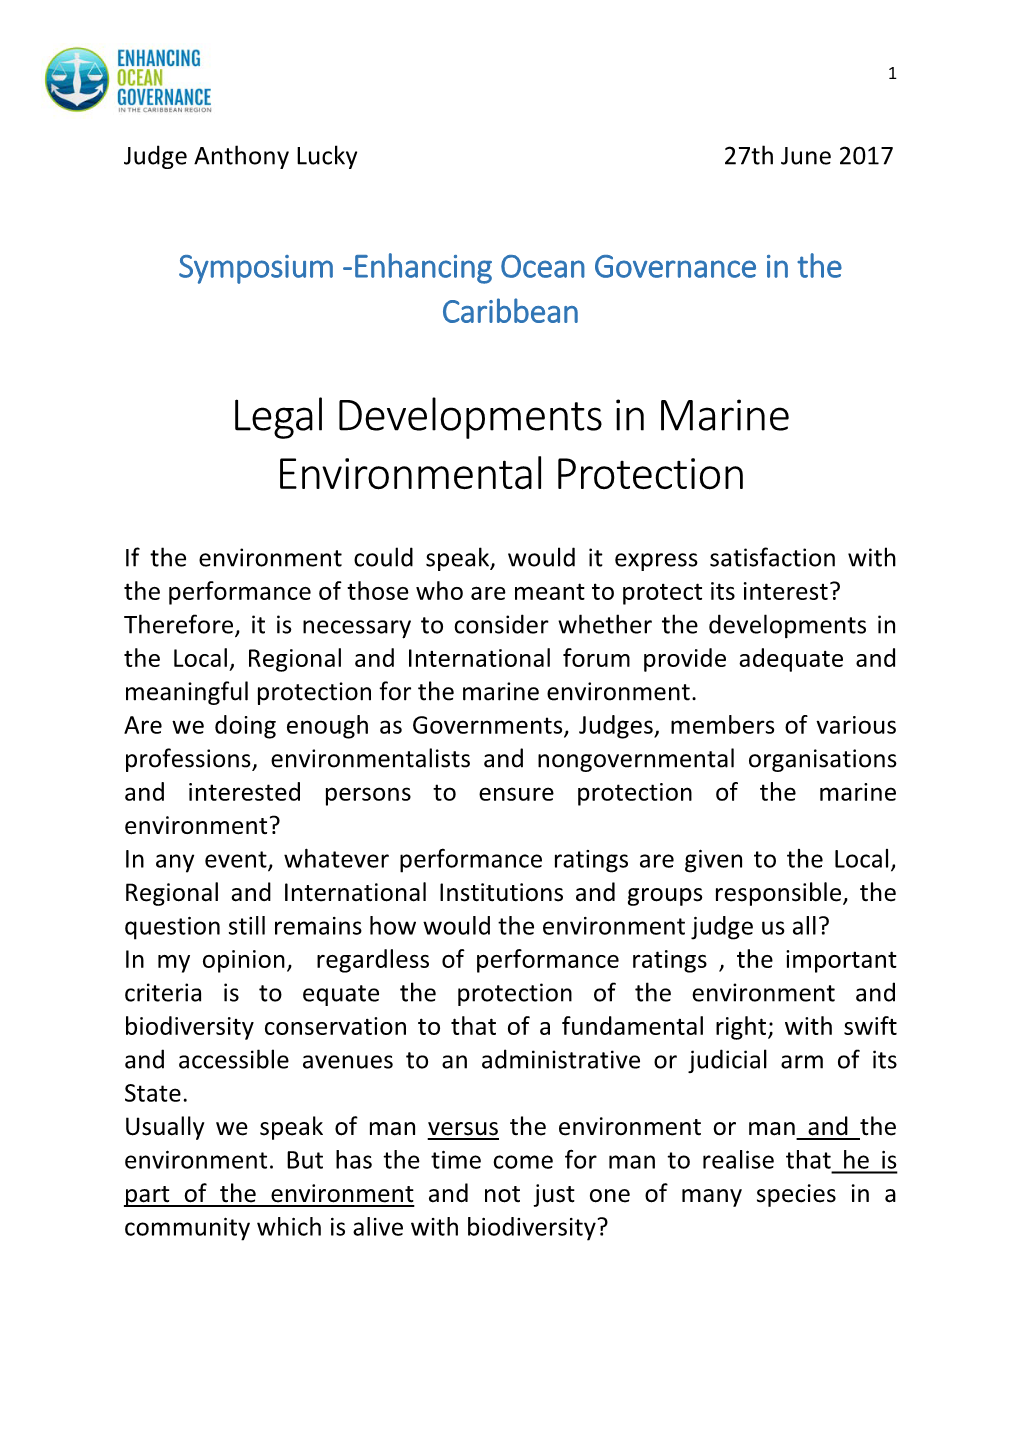 Legal Developments in Marine Environmental Protection